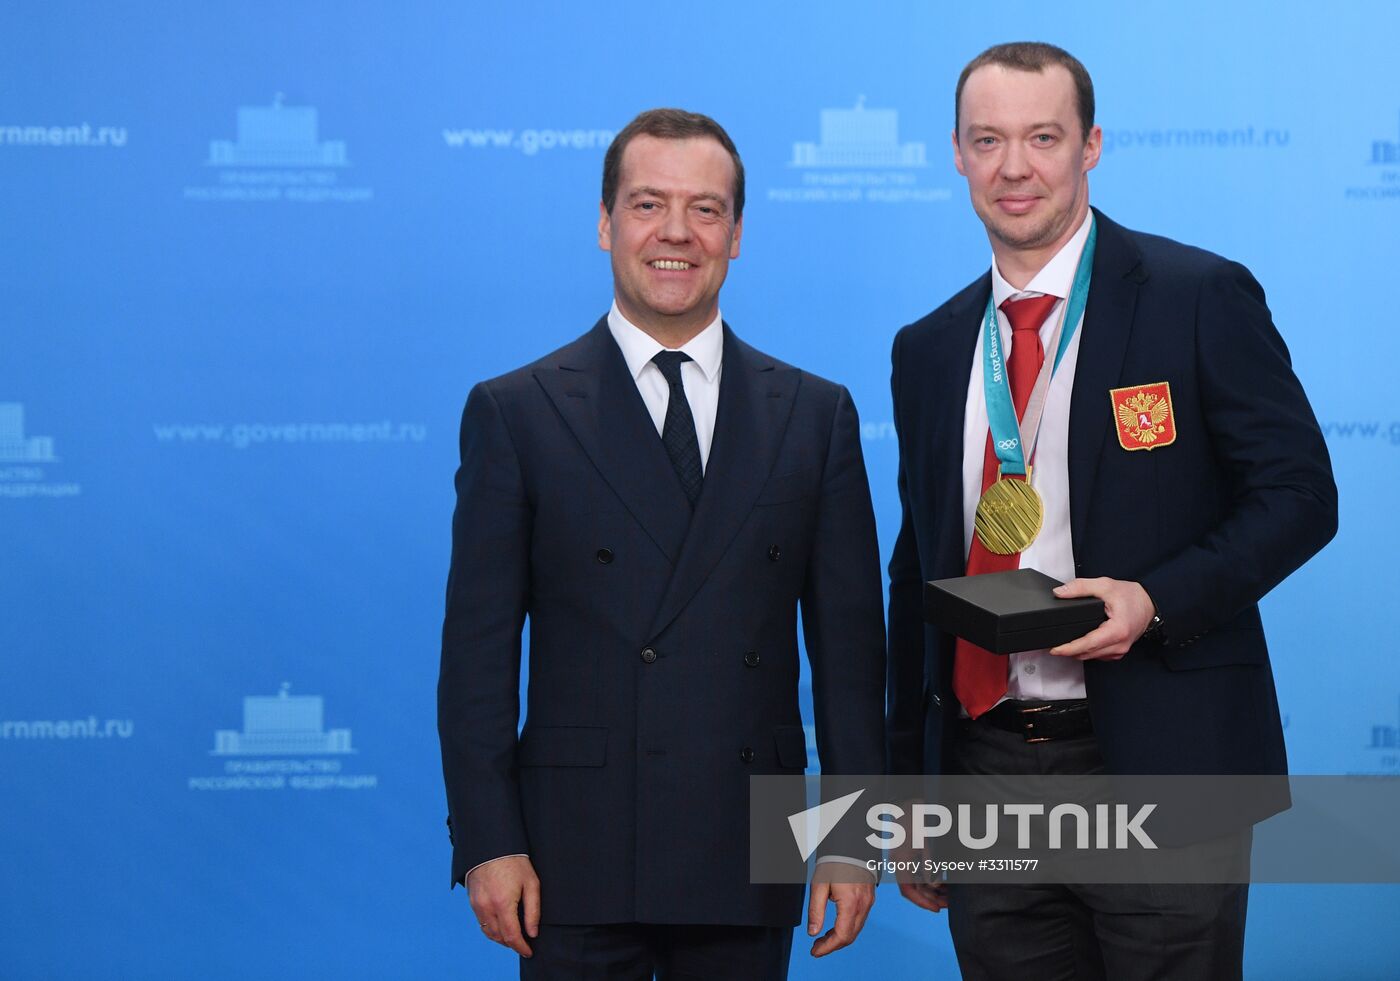 Prime Minister Dmitry Medvedev presents cars to 2018 Winter Olympics medalists at ceremony